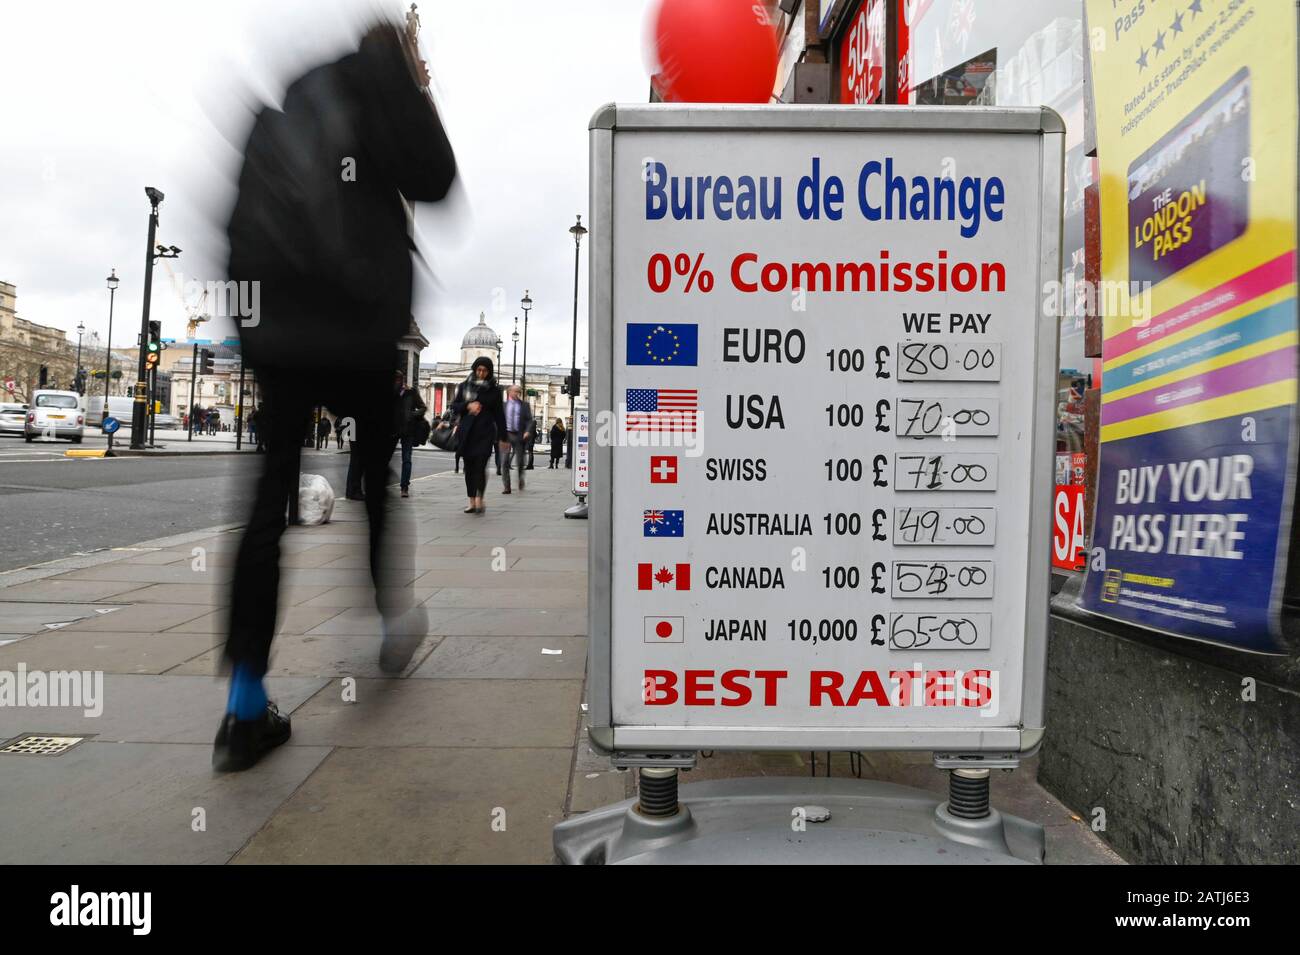 London, UK.  3 February 2020.  People pass by signs outside a foreign currency exchange near Trafalgar Square.  Boris Johnson, Prime Minister, has given a speech in Greenwich calling for a Canada-style free trade deal between the UK and European Union.  In the EU-Canada deal import tariffs on most goods have been eliminated between the two countries, but some customs and VAT checks still exist.  Currency markets have seen a fall in sterling in reaction to the speech.  Credit: Stephen Chung / Alamy Live News Stock Photo